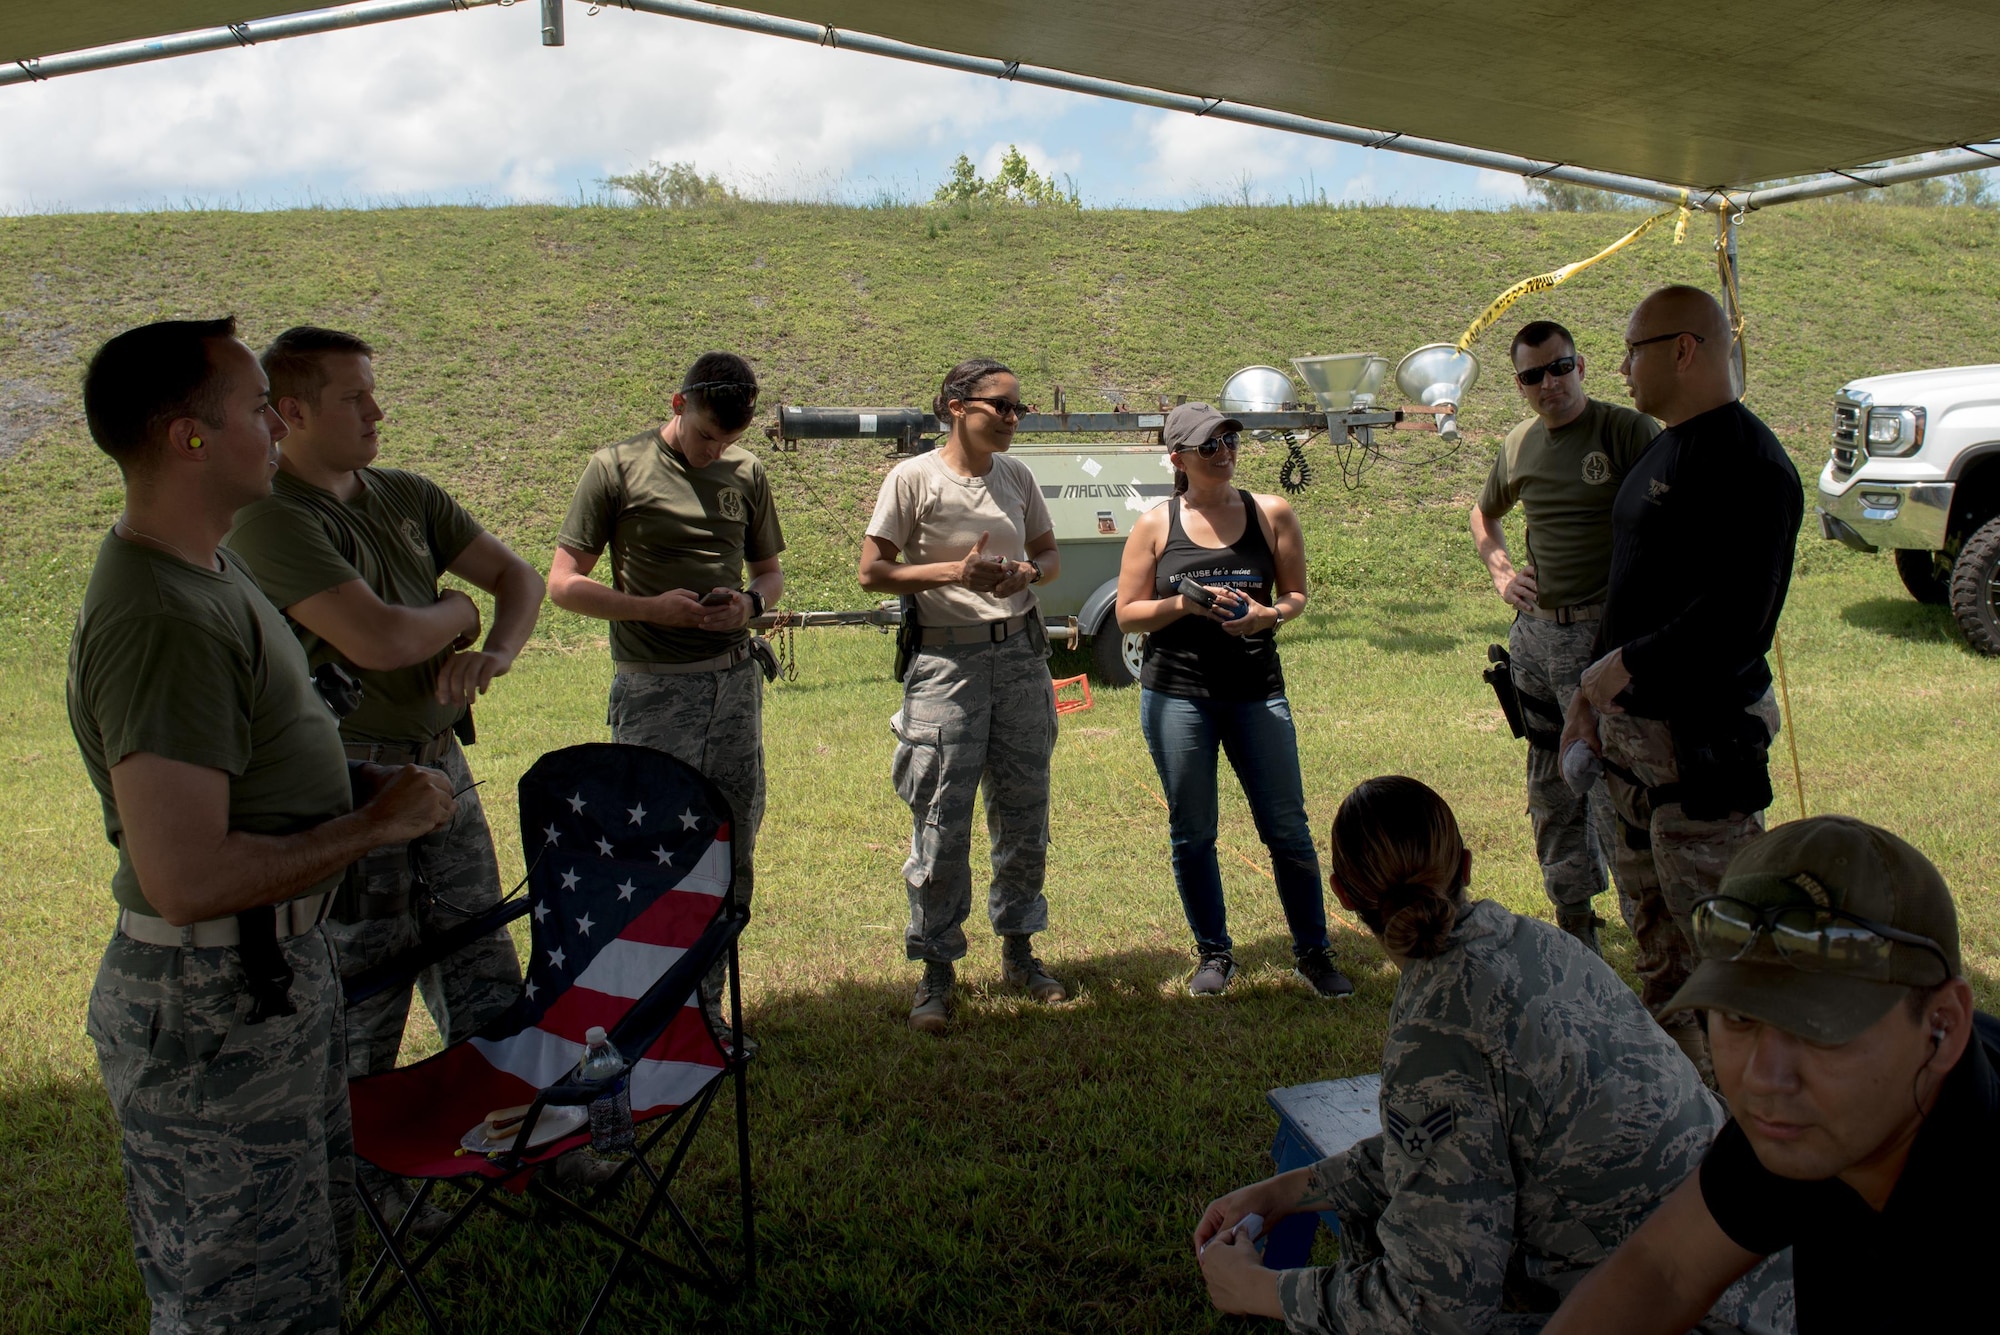 Airmen from the 36th Security Forces Squadron speak with the Guam Police Department Chief of Police Joseph Cruz April 29, 2017, at Naval Computer and Telecommunications Station, Guam. Members of the GPD hosted this friendly shoot-off to bring law enforcement from around the island together. (U.S. Air Force photo by Airman 1st Class Jacob Skovo)